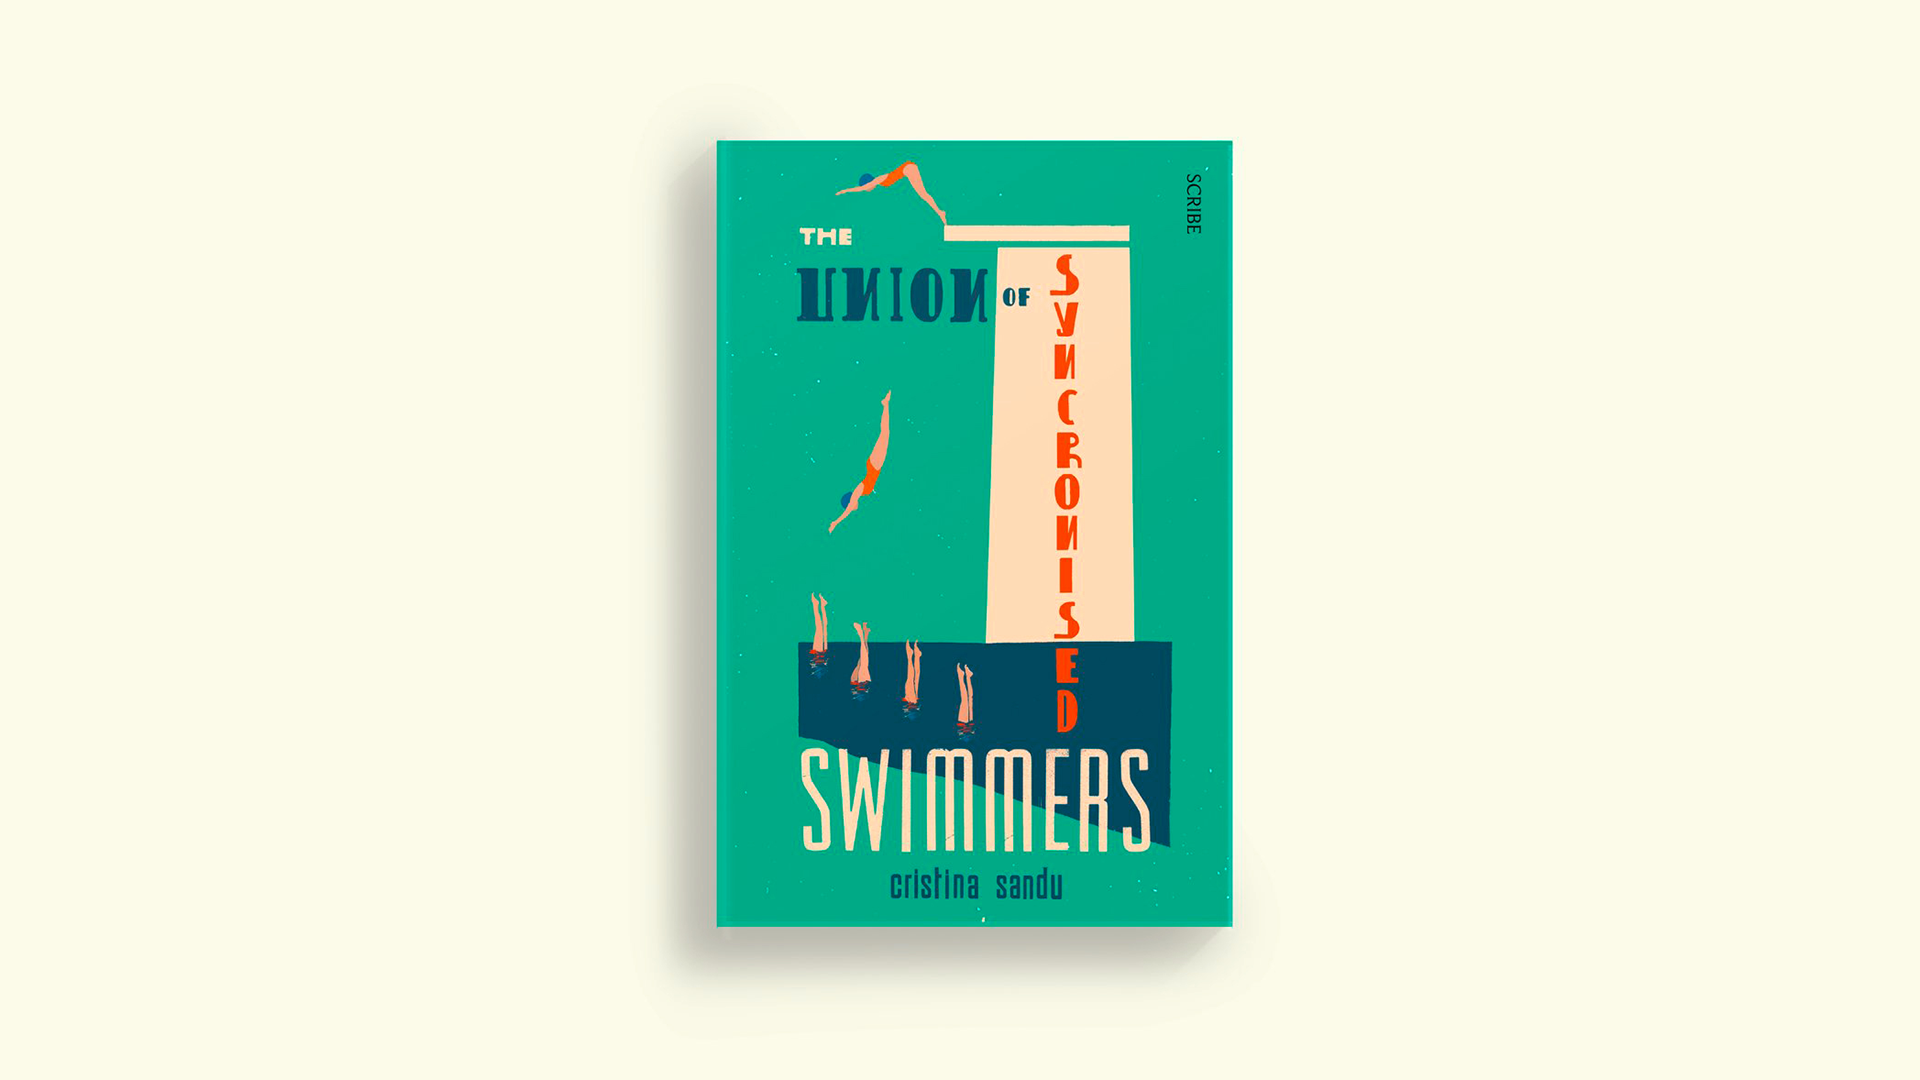 The Union of Synchronised Swimmers by Cristina Sandu dives into the complexities of migration | Calvert Reads